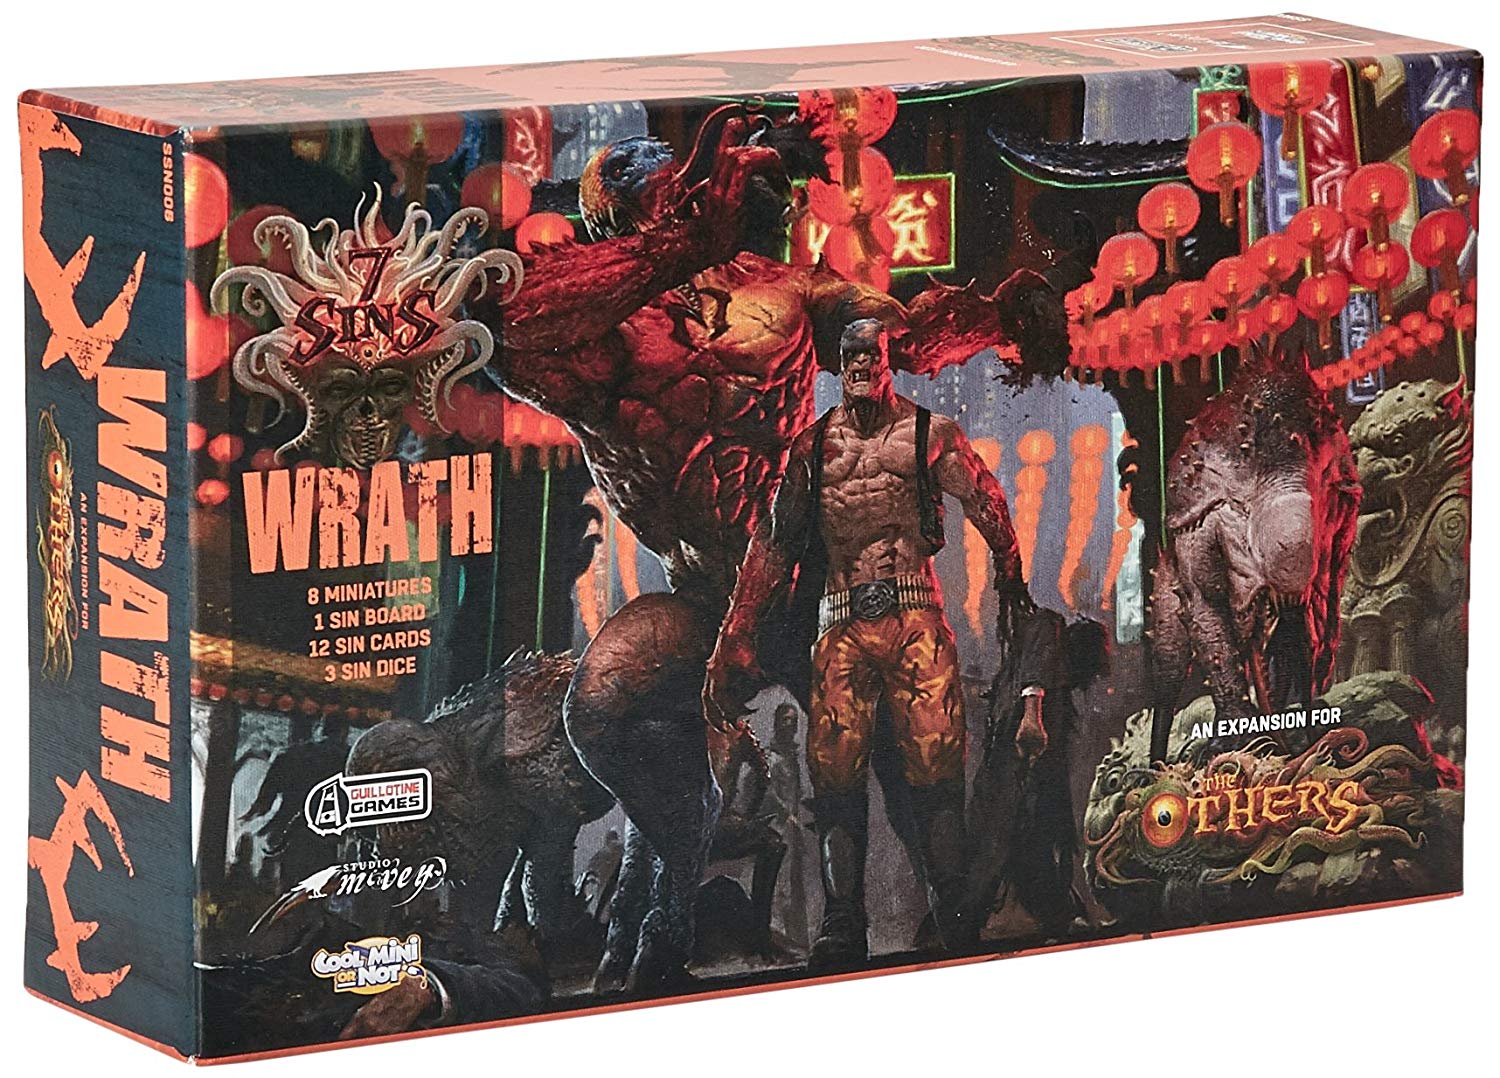 Cool Mini or Not The Others Wrath Box Board Game